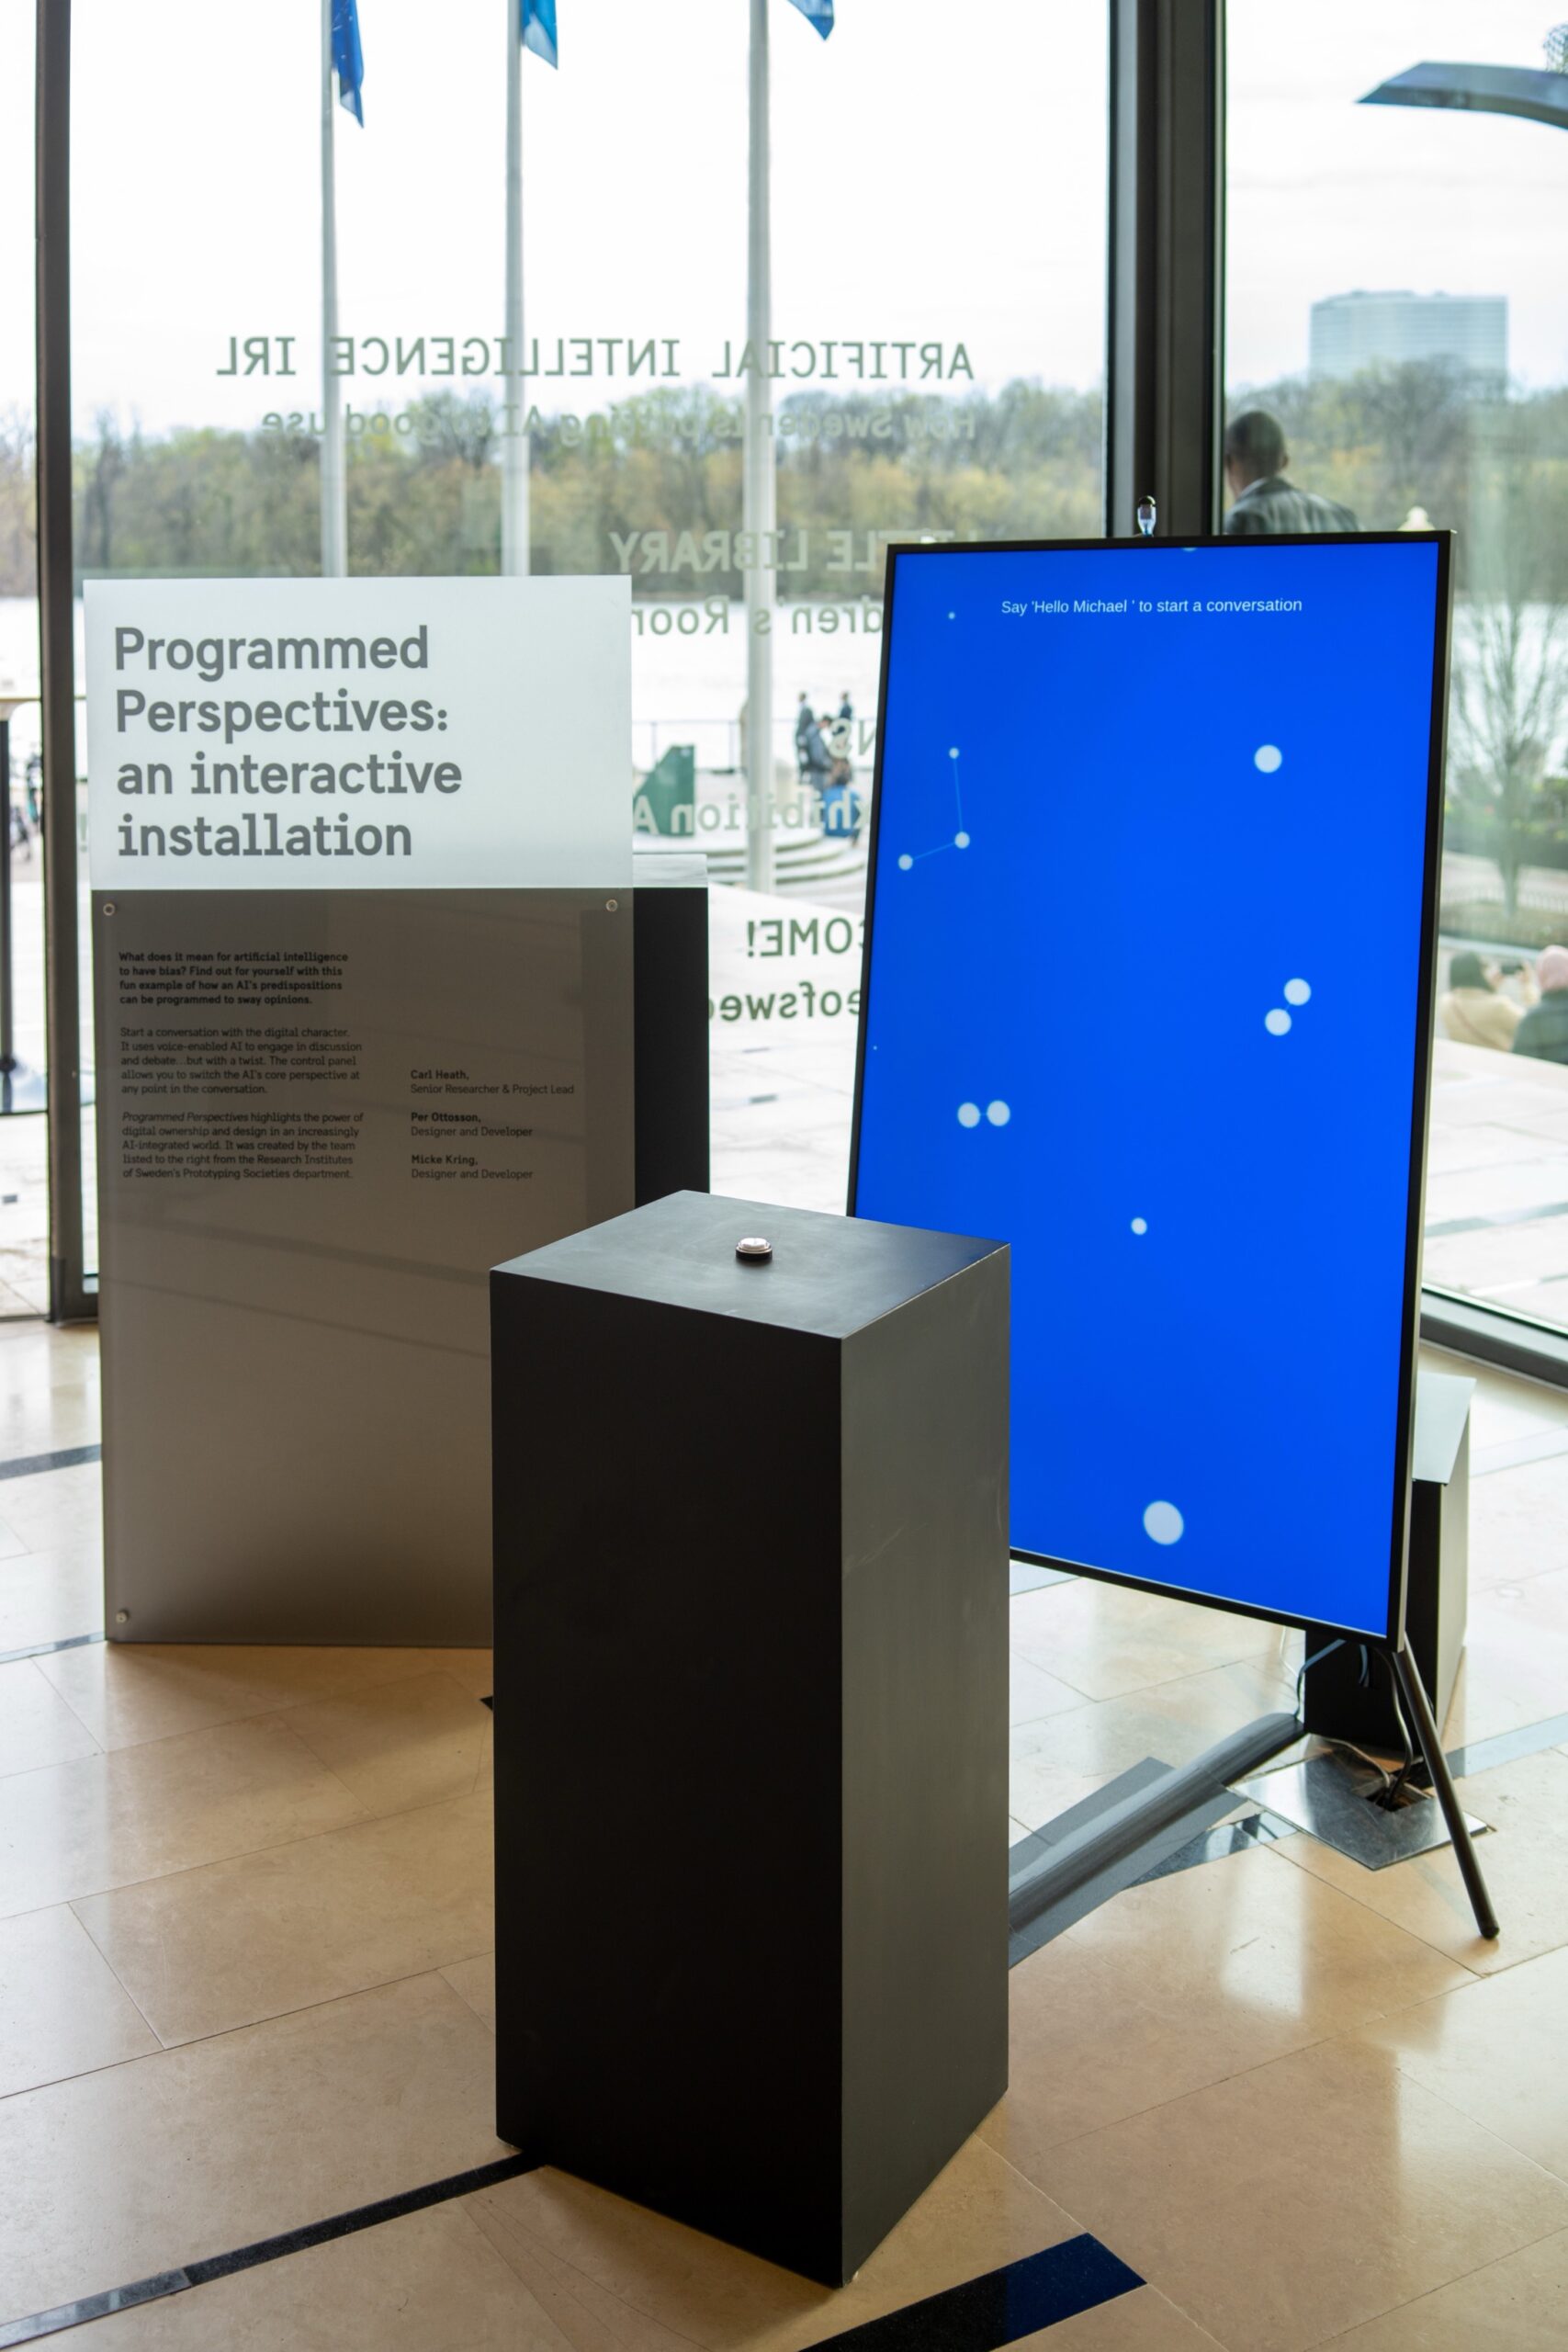 The installation Programmed Perspectives at the House of Sweden in Washington.